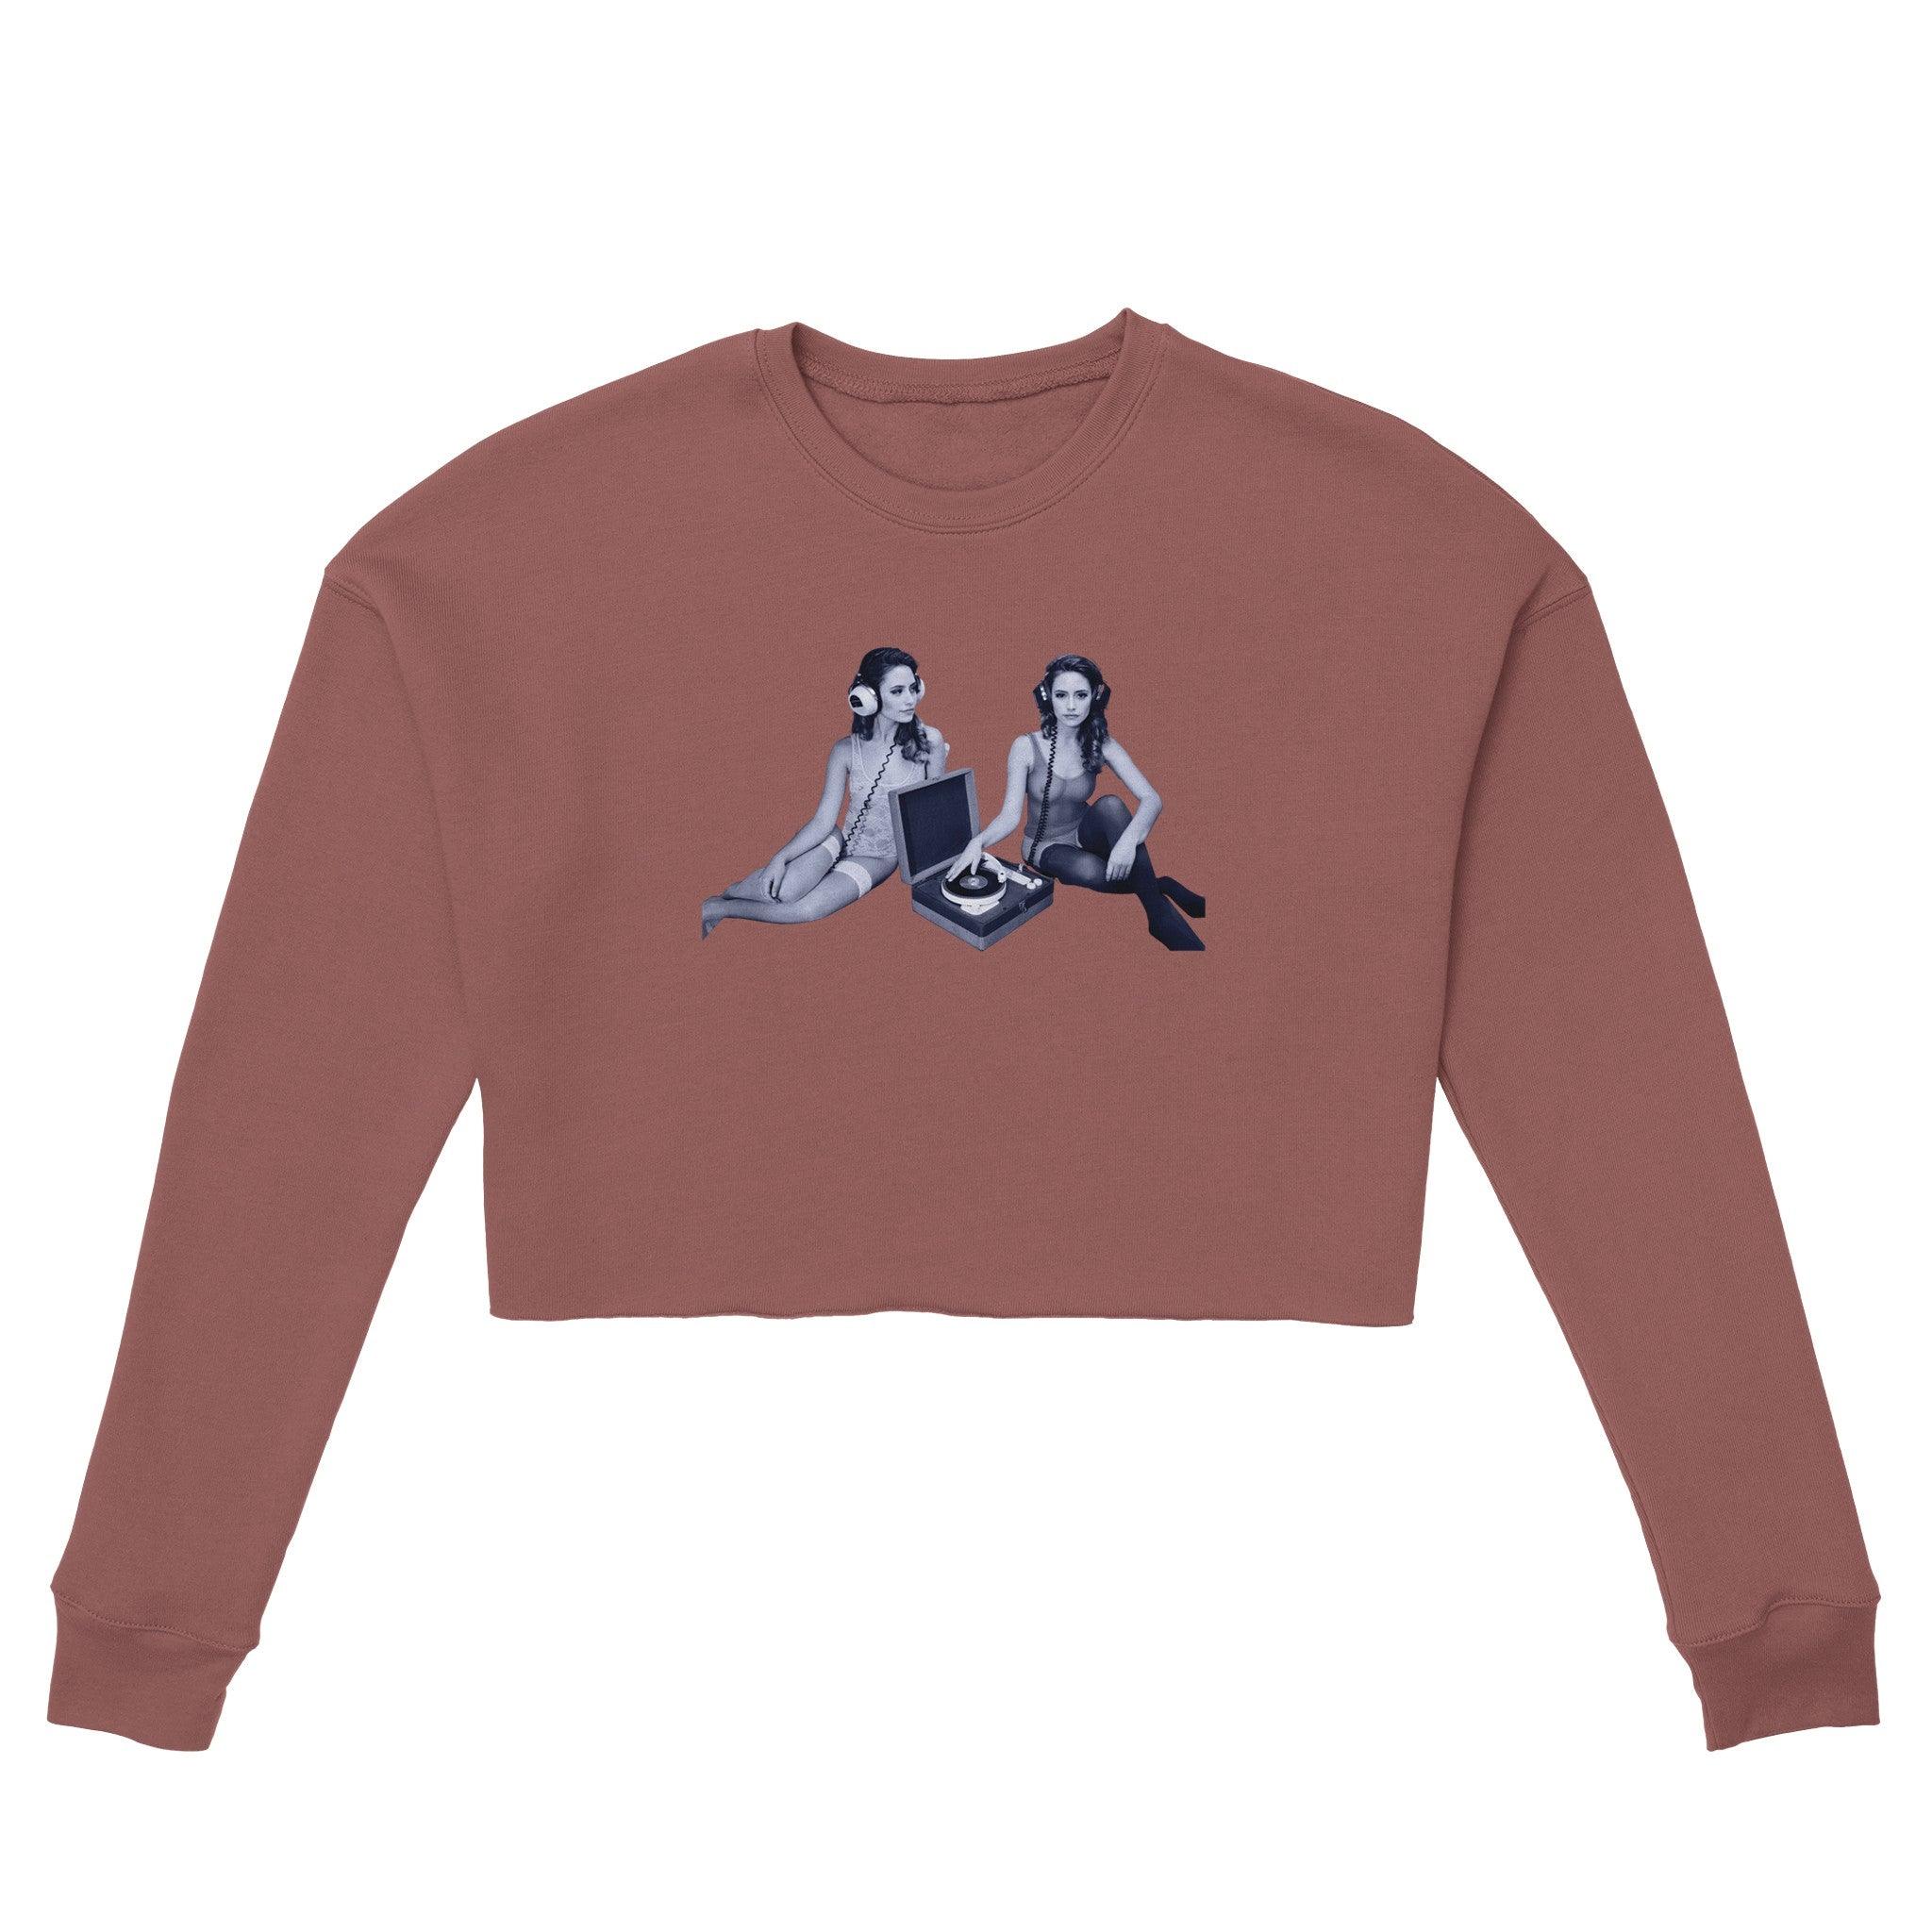 'Pre-Party' Cropped Sweatshirt - POMA